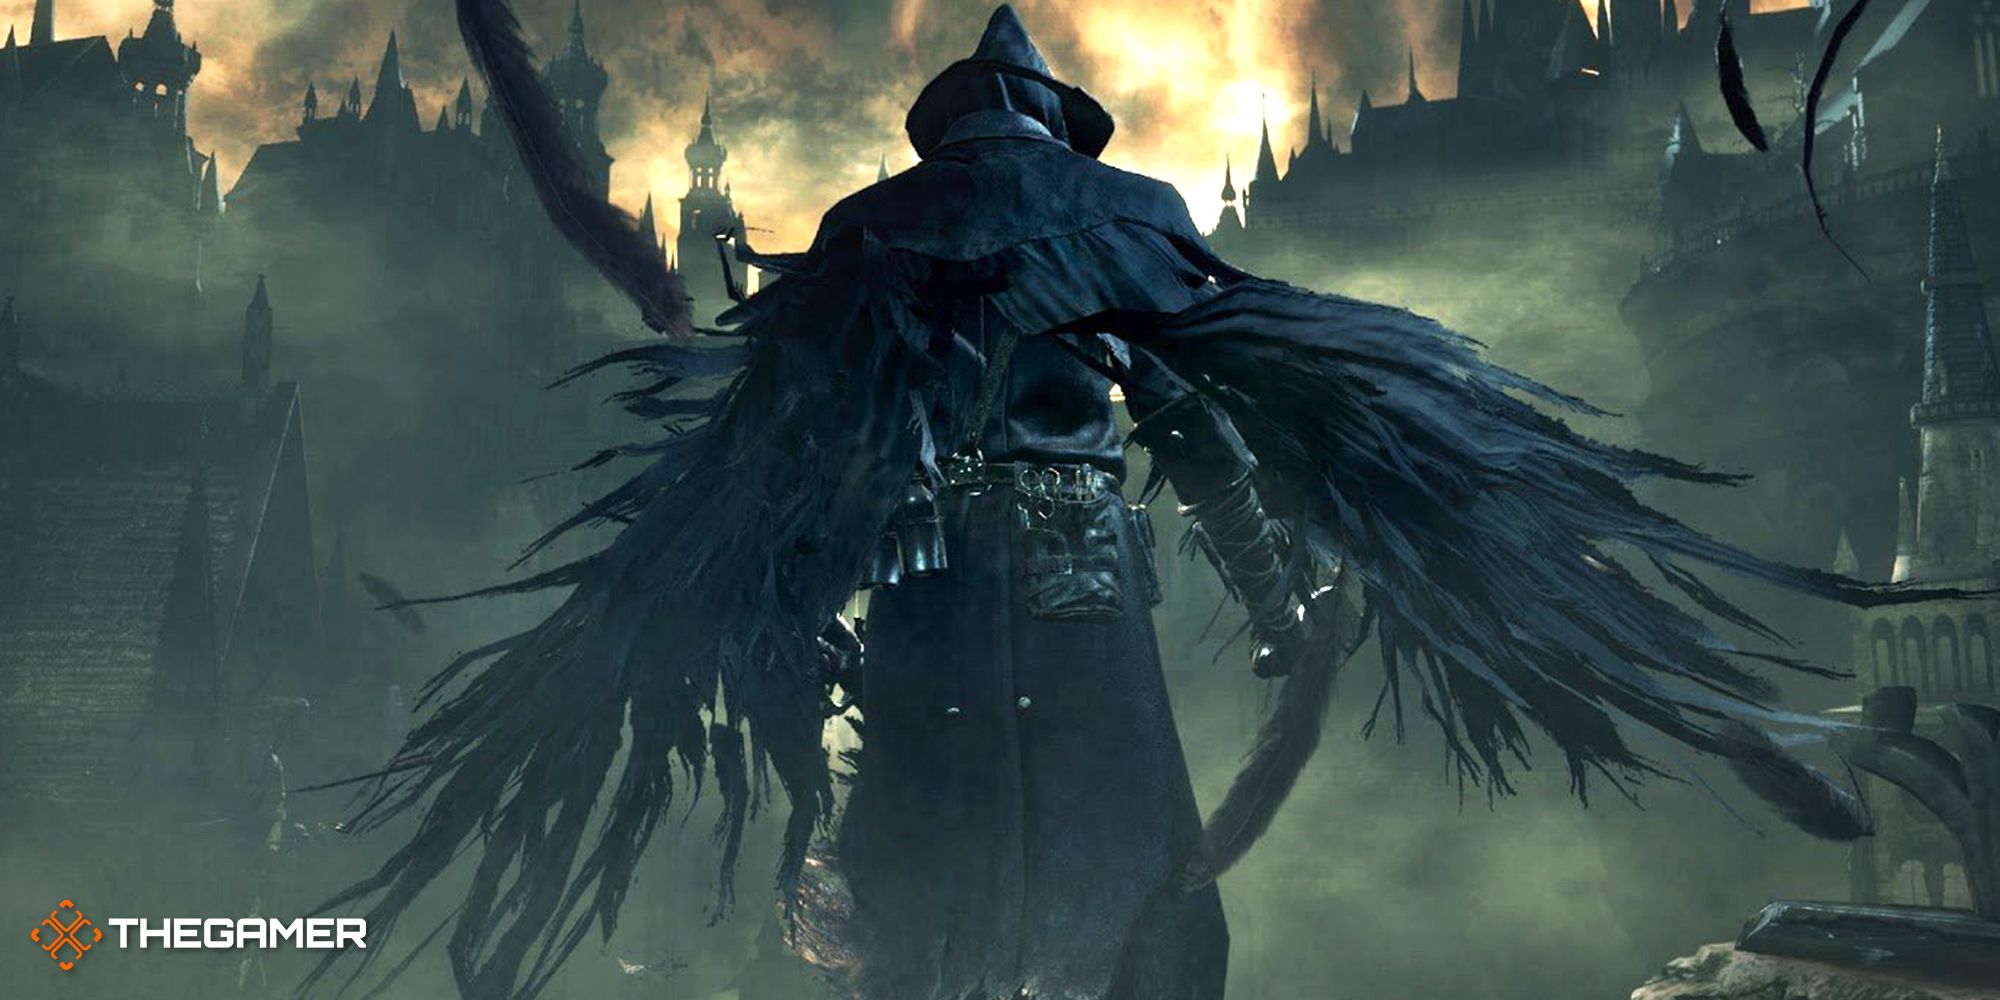 1-Bloodborne How To Complete Eileen The Crow’s Questline